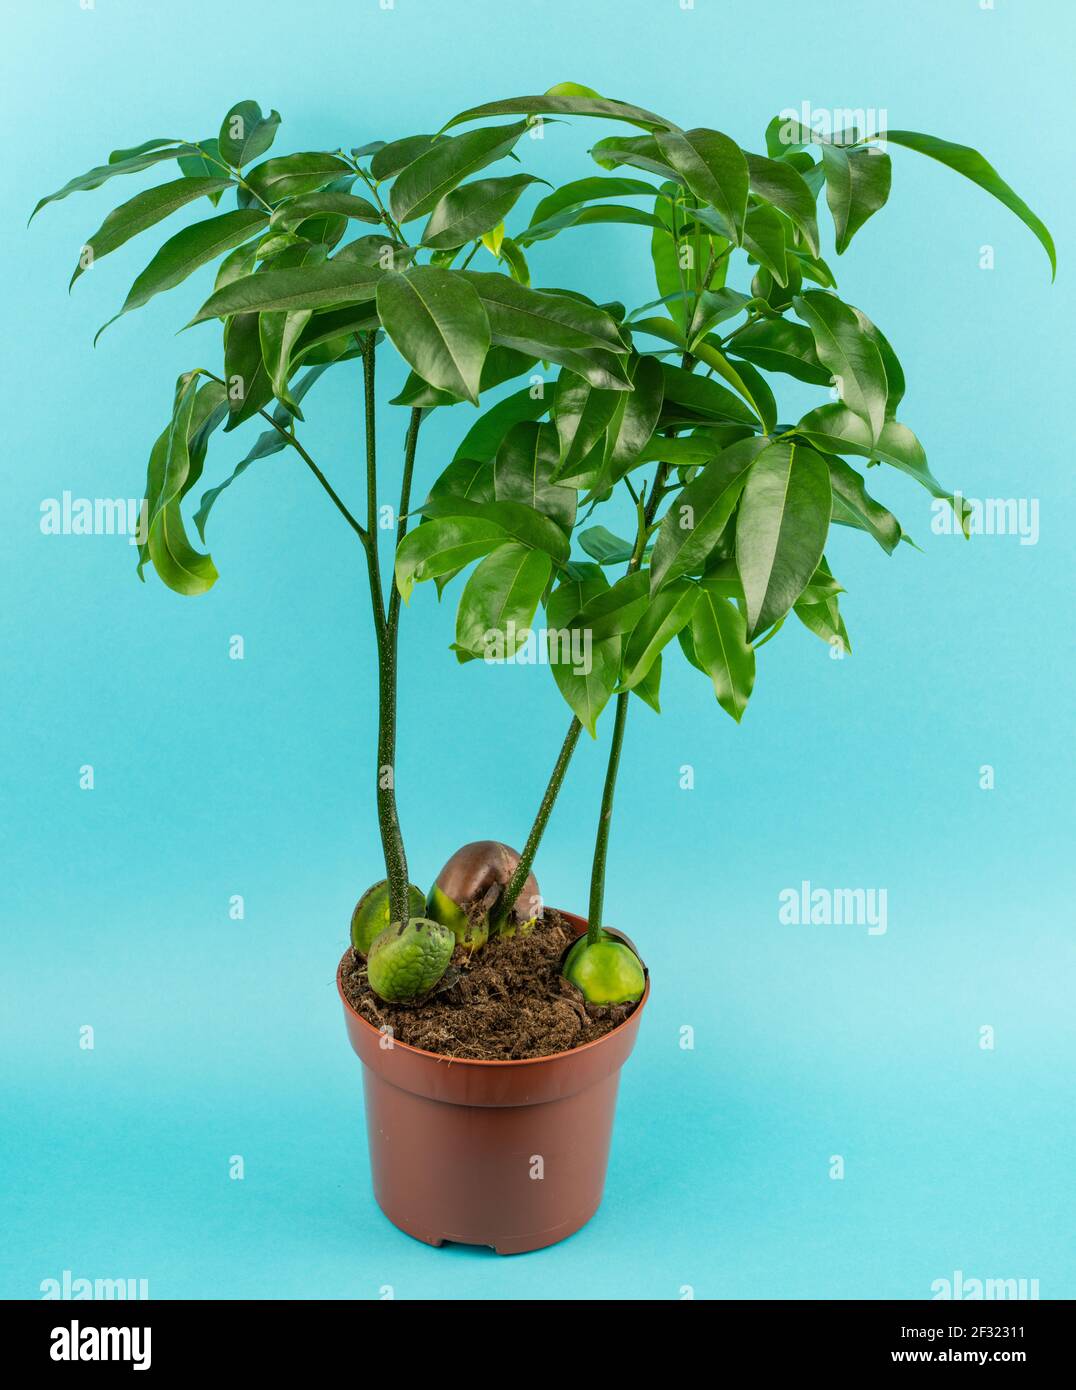 Castanospermum australe in pot with blue background, top view Stock Photo